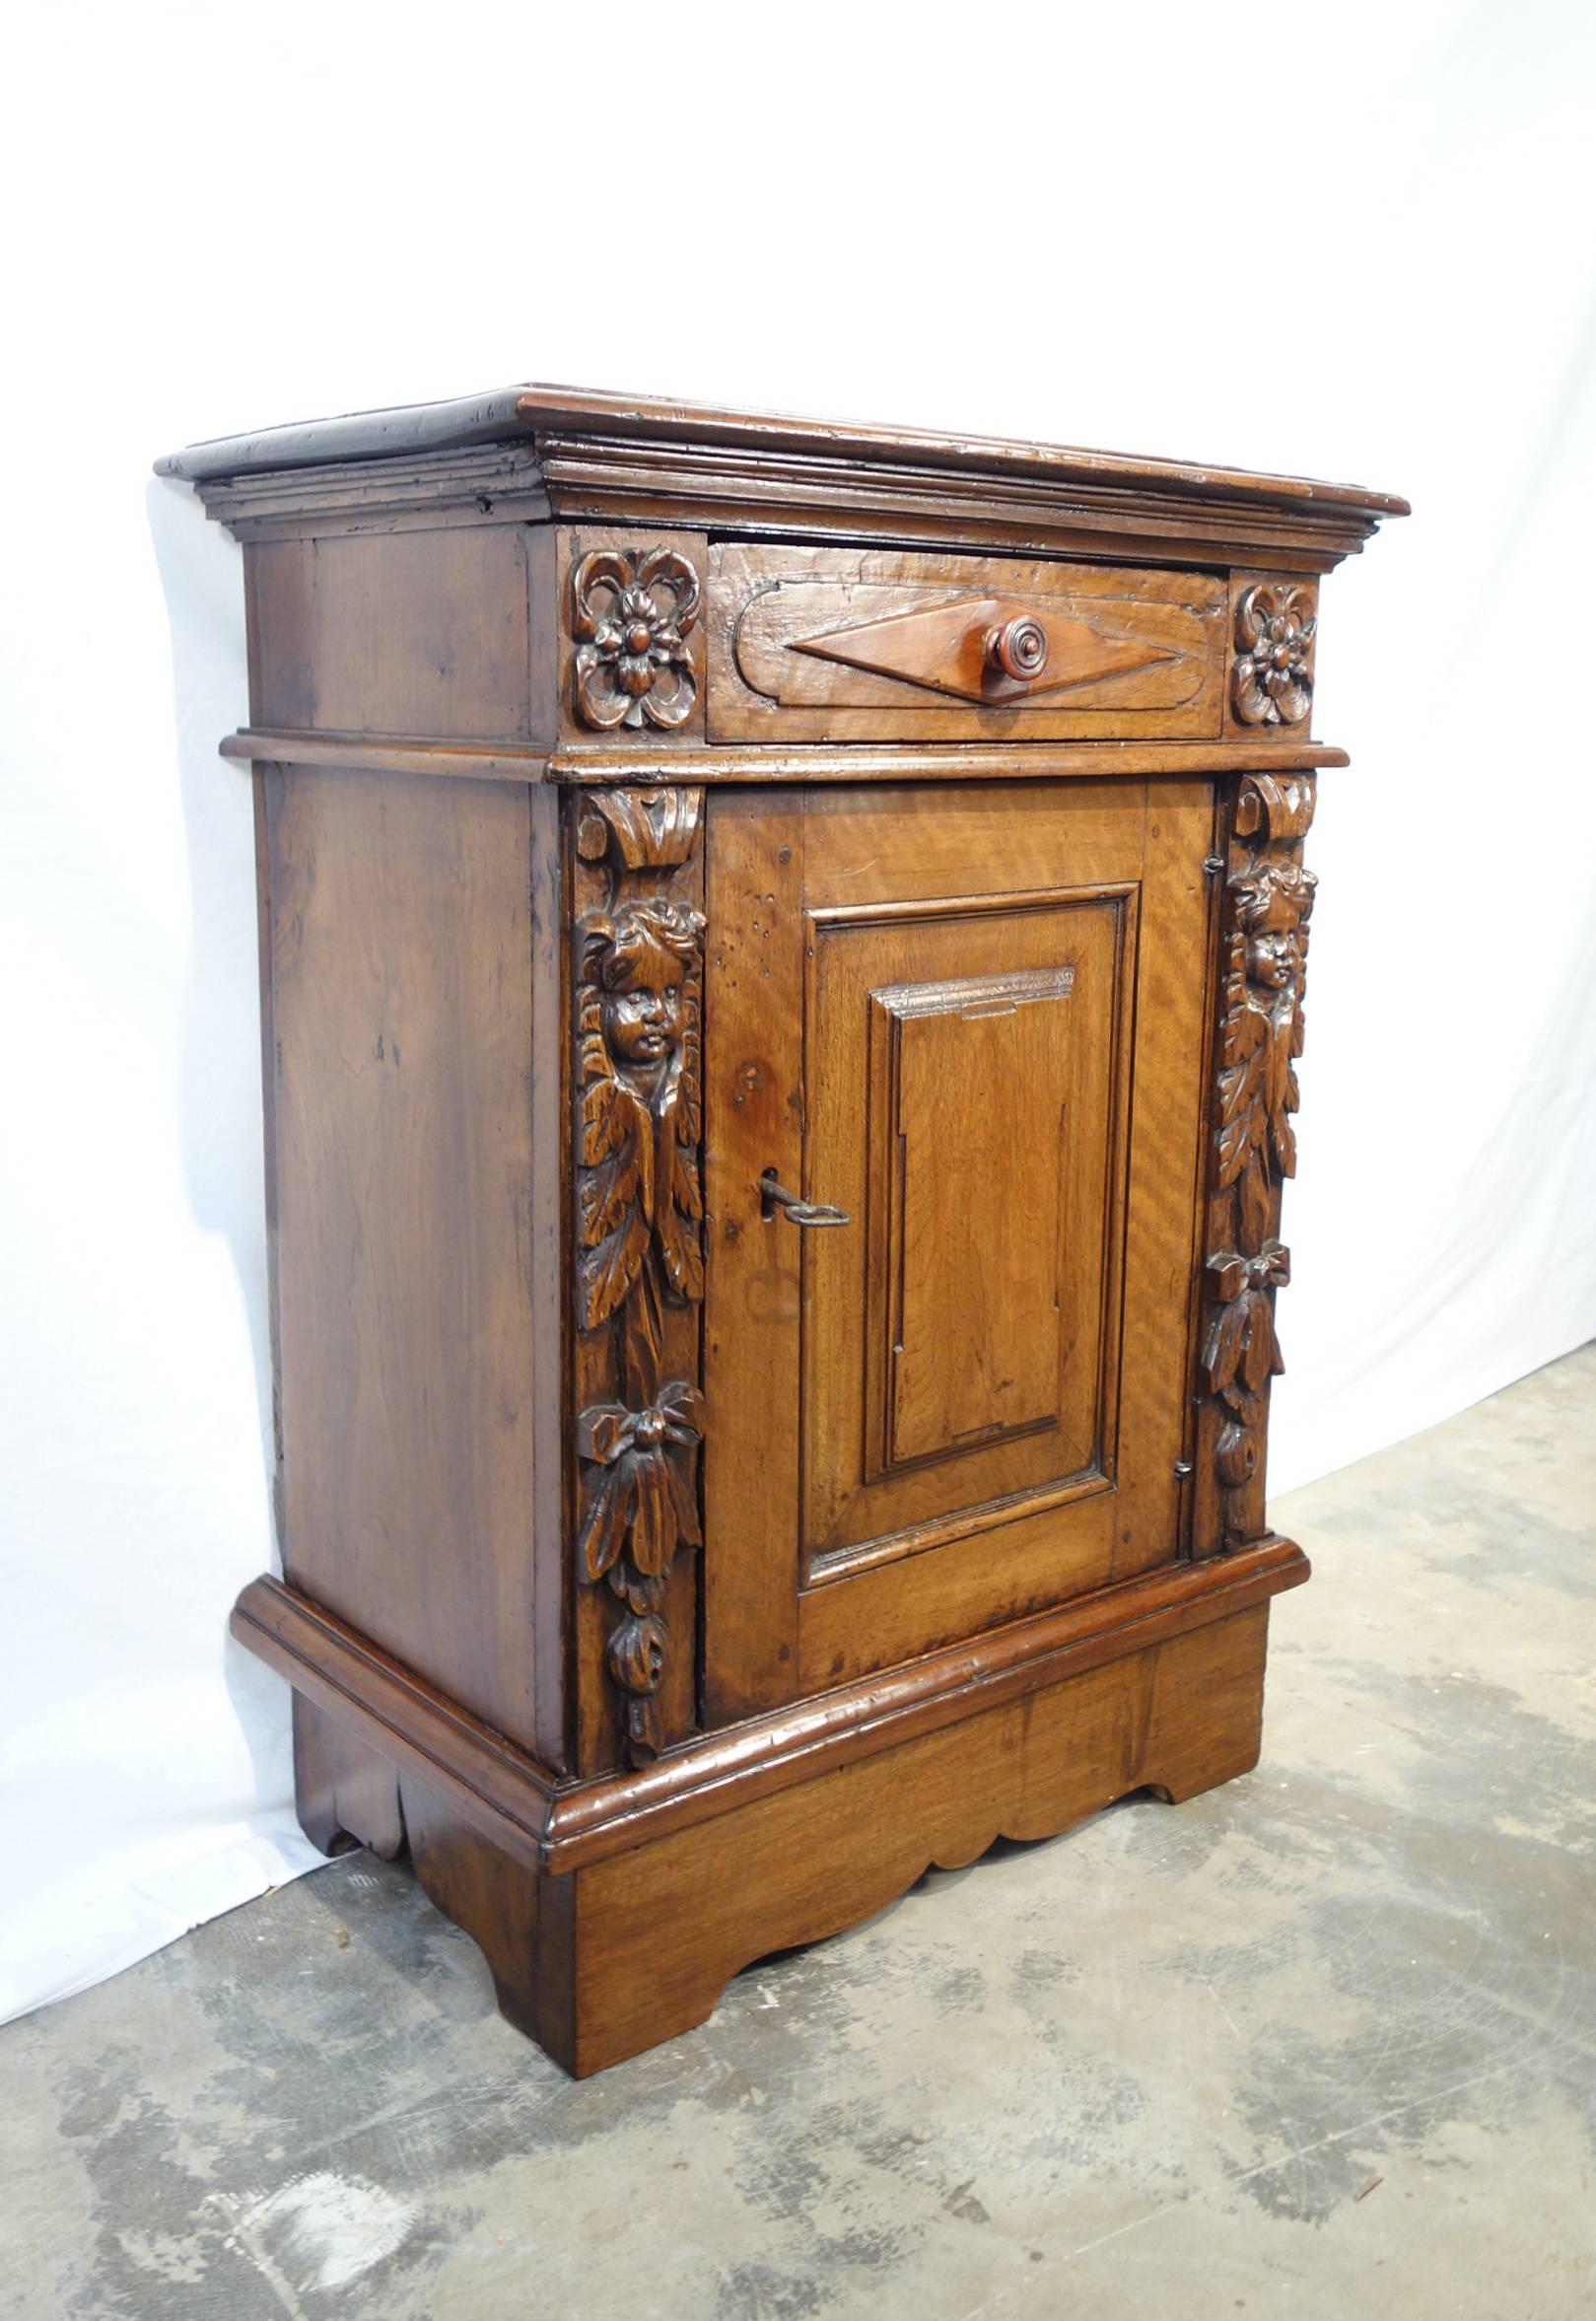 19th century Renaissance style nightstand made of warm color solid walnut with one-drawer and one locking door, with key.
Wonderful hand-carved cherubs faces with triumph of leaves on the front sides. Interesting solid walnut single slab back